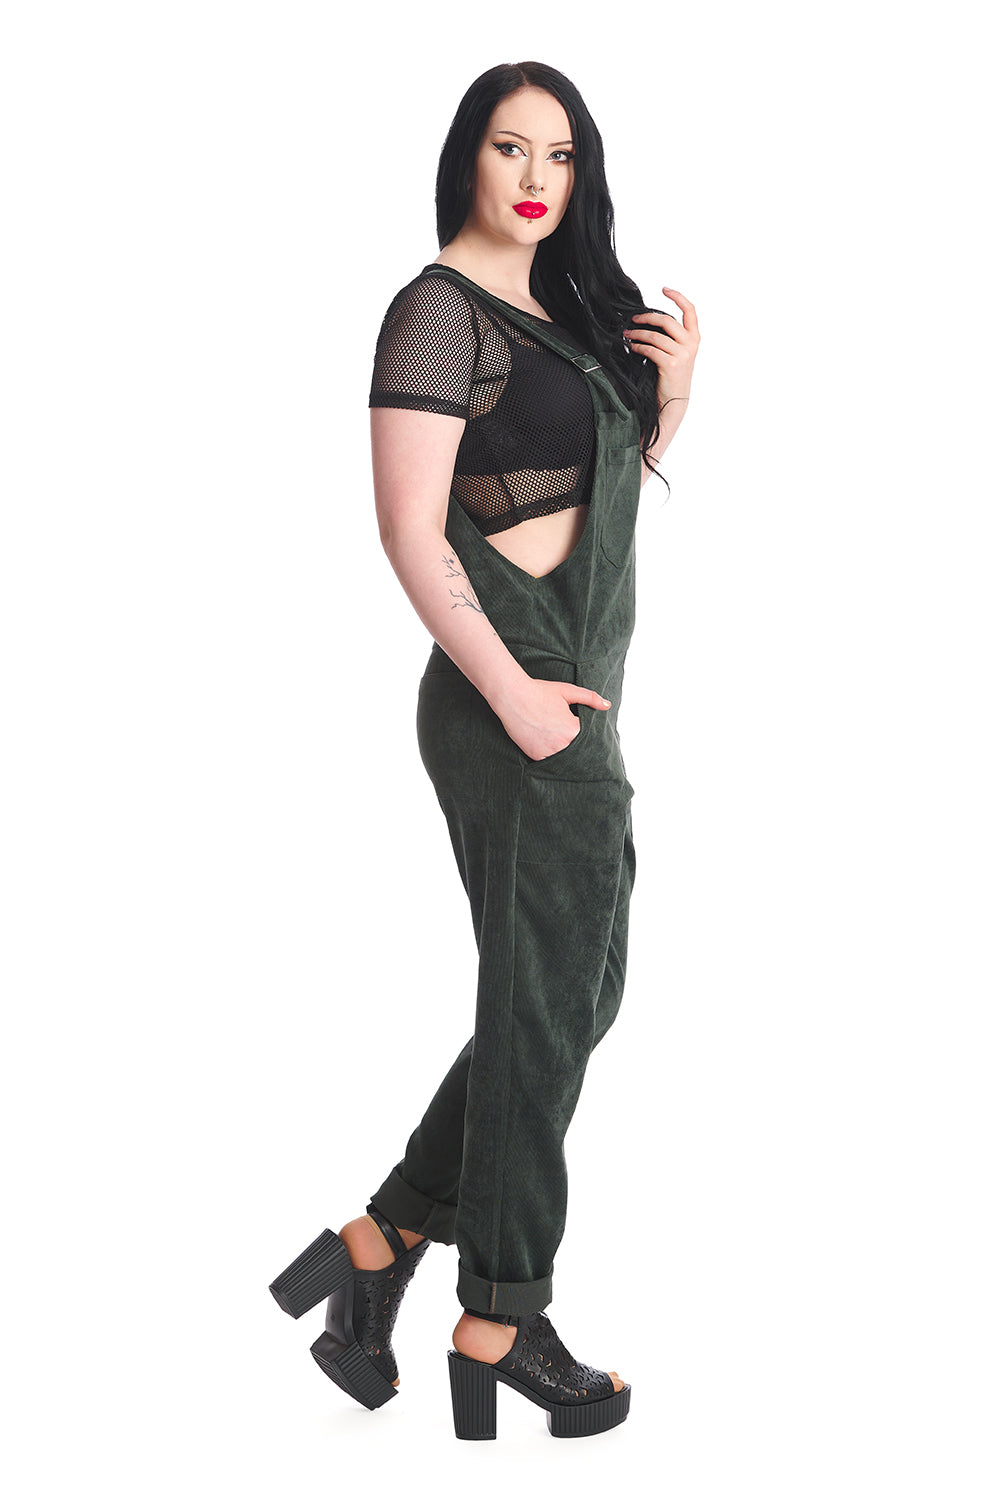 Gothic model in dark green dungarees with a black mesh top 